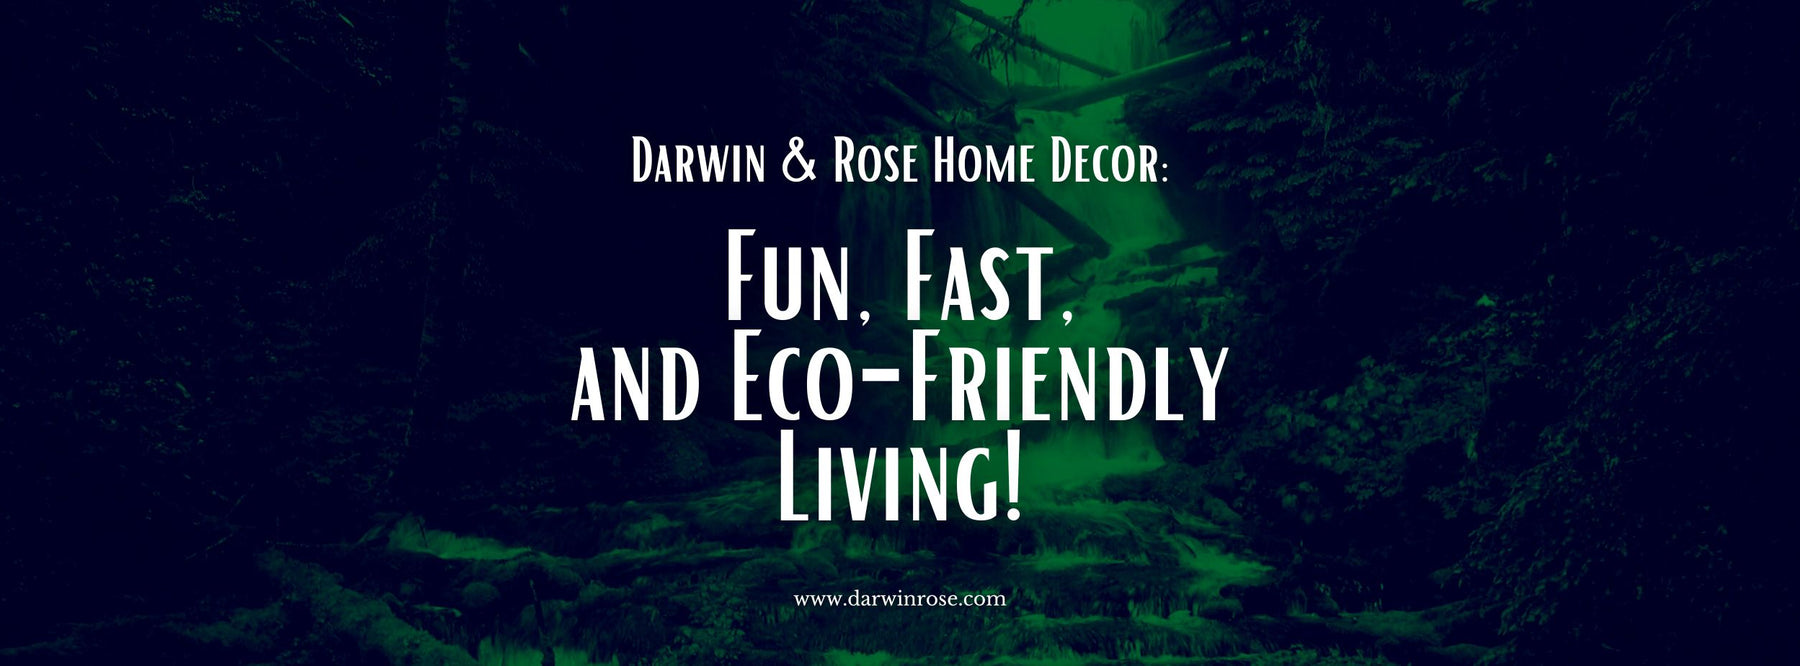 Darwin & Rose Home Decor: Fun, Fast, and Eco-Friendly Living!